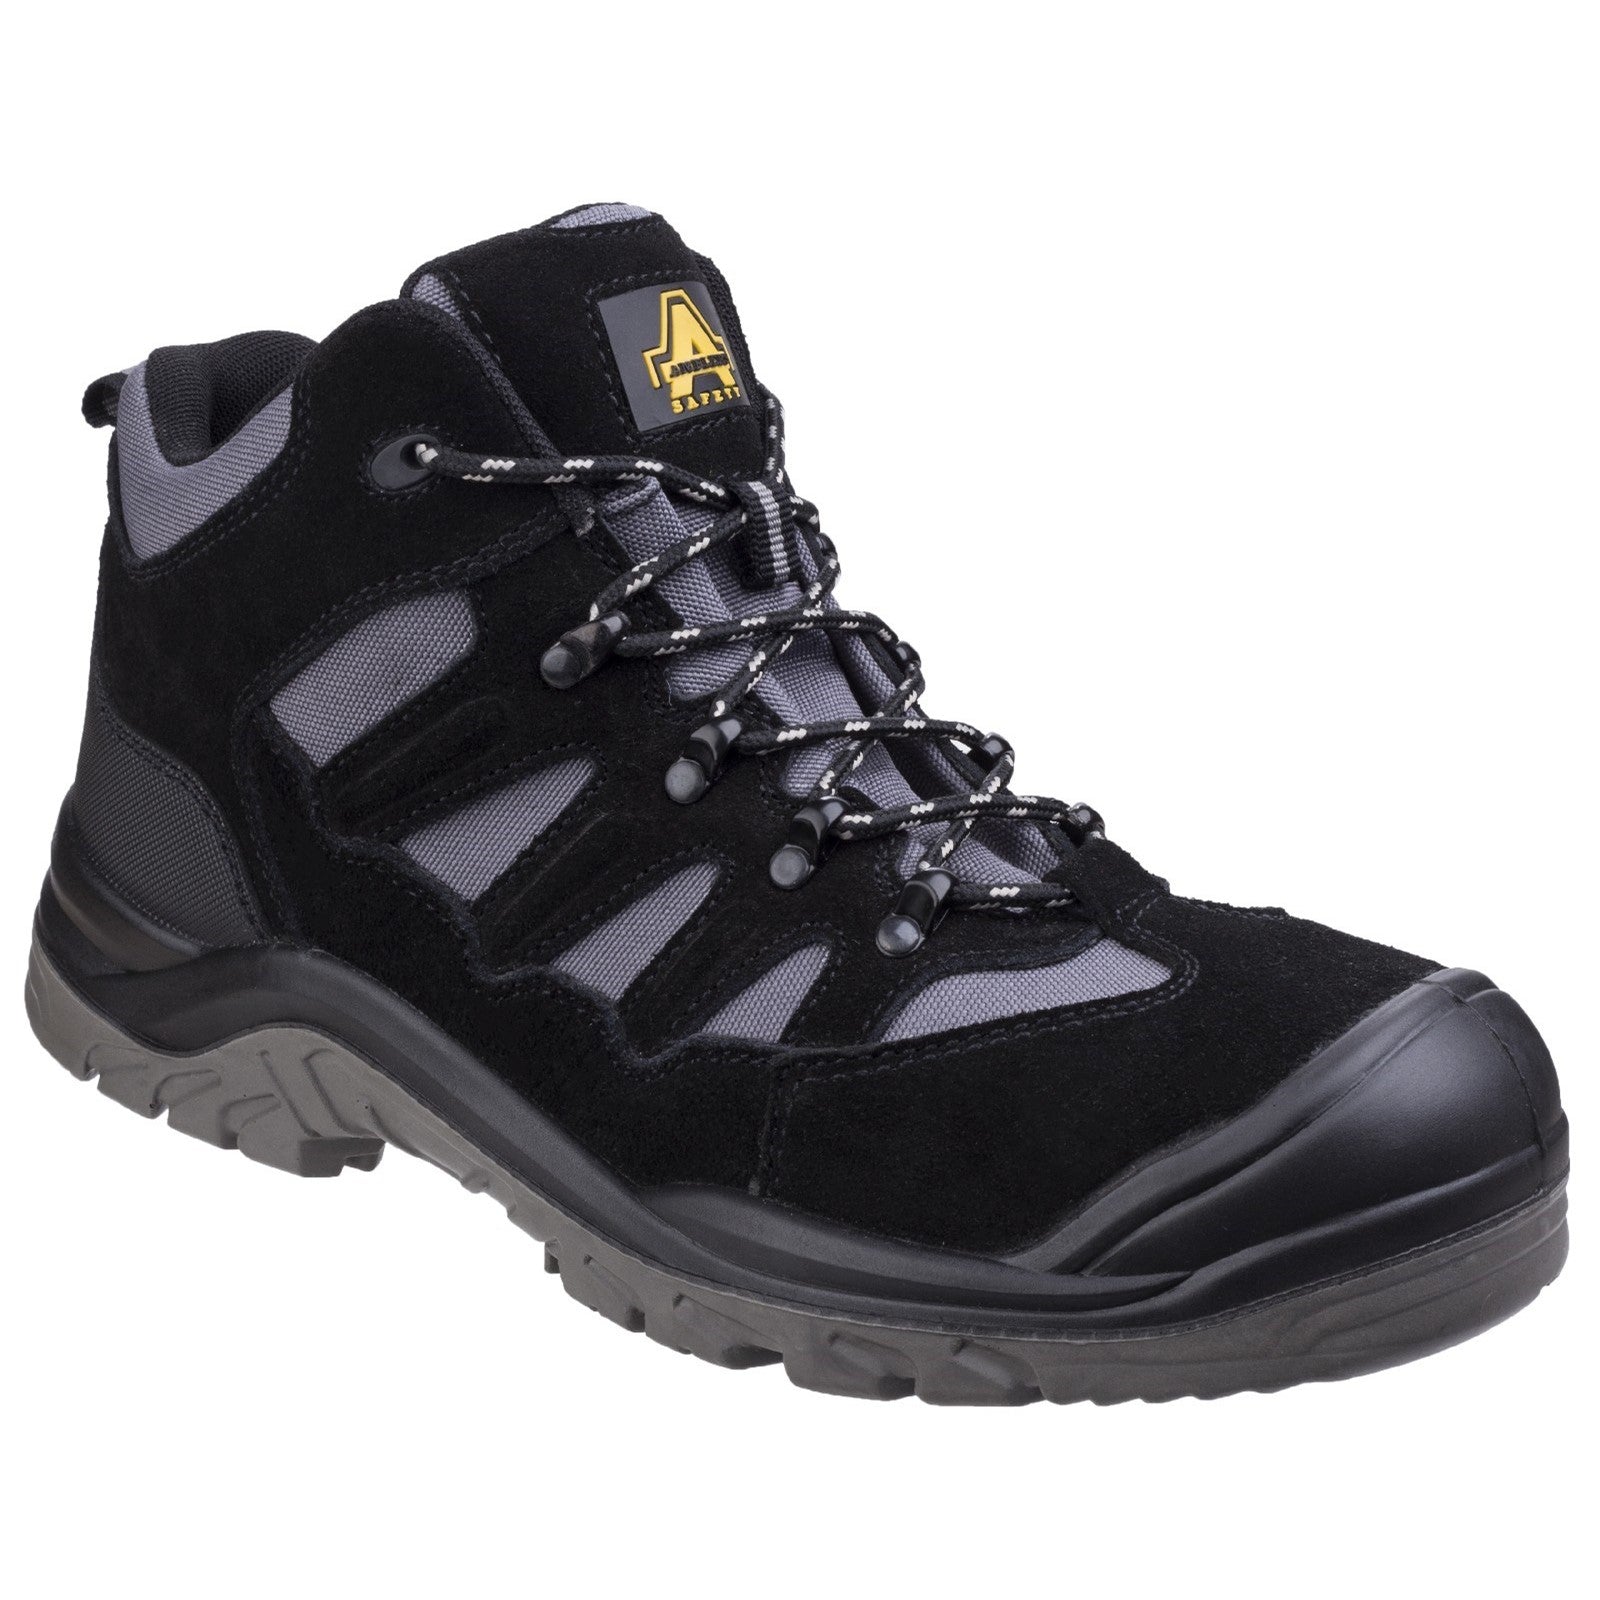 AS251 Lightweight Safety Hiker Boot, Amblers Safety